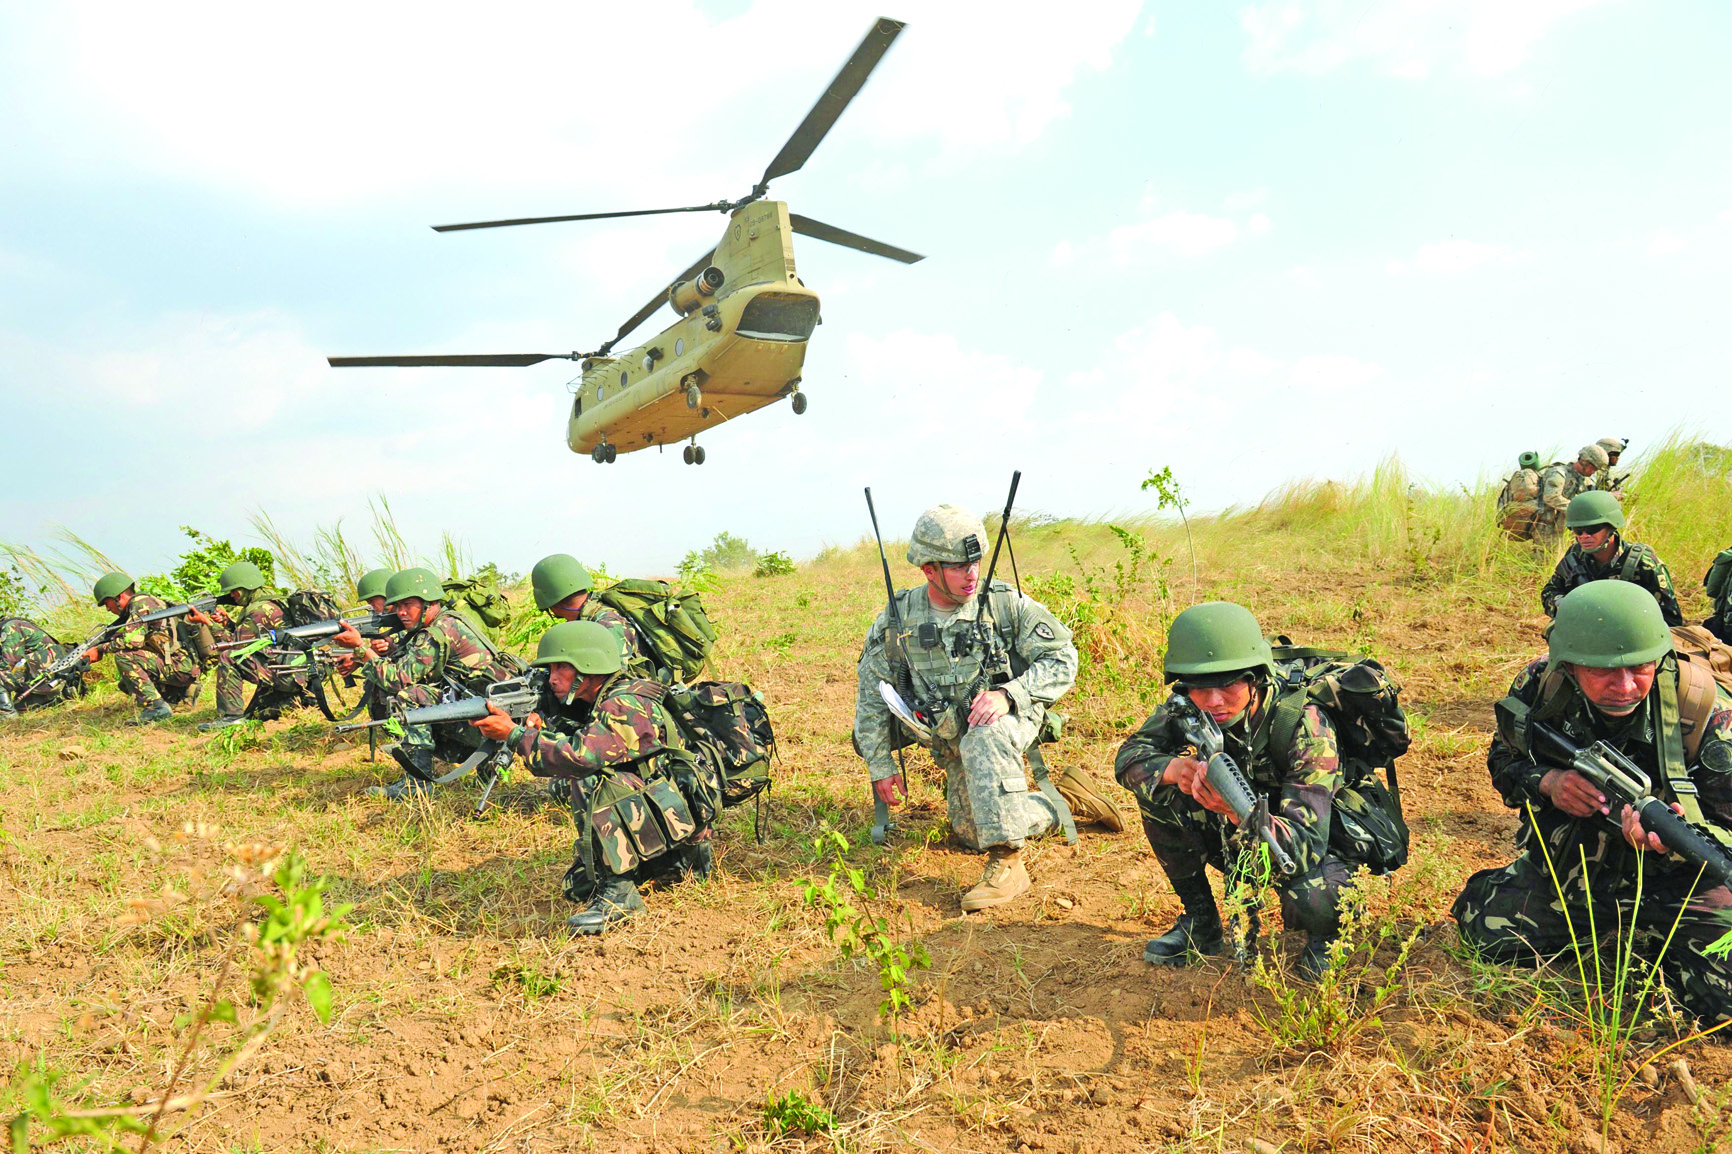 (FILES) This file photo taken on April 20, 2015 shows Philippine soldiers and a US Army soldier from the 2nd Stryker Brigade Combat unit of the 5th Infantry Division based in Hawaii taking their positions after disembarking from a C-47 Chinook helicopter during an air assault exercise inside the military training camp at Fort Magsaysay in Nueva Ecija province. - The Philippines told the US on February 11, 2020 it was quitting a pact key to their historical military alliance, which triggers a six-month countdown to the deal's termination, Manila said. (Photo by TED ALJIBE / AFP)